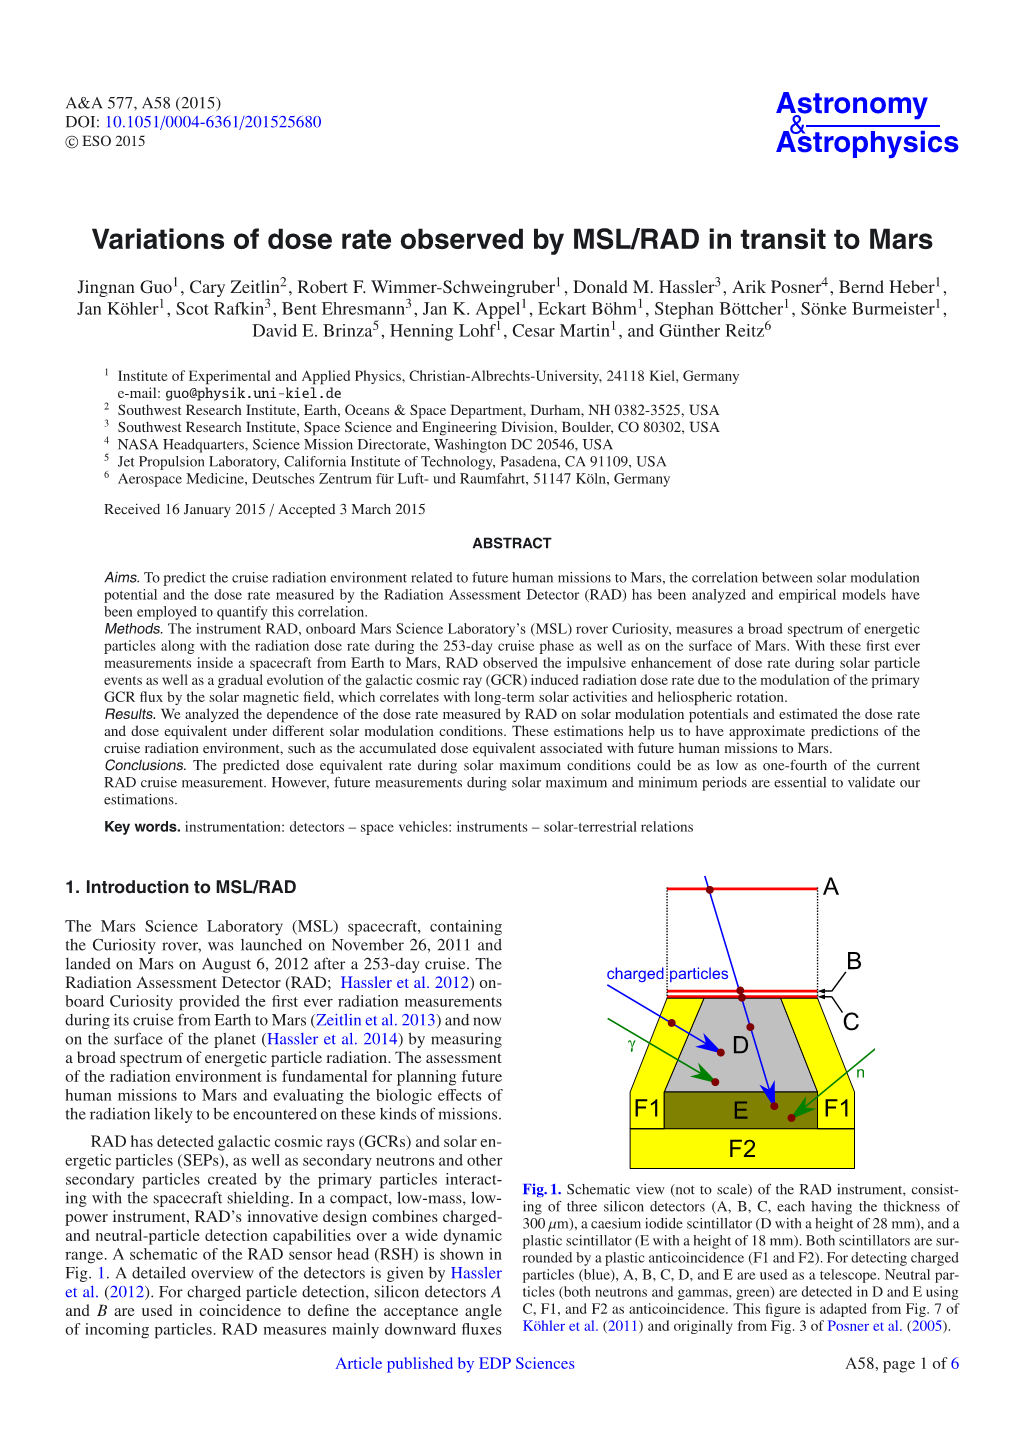 Variations of Dose Rate Observed by MSL/RAD in Transit to Mars